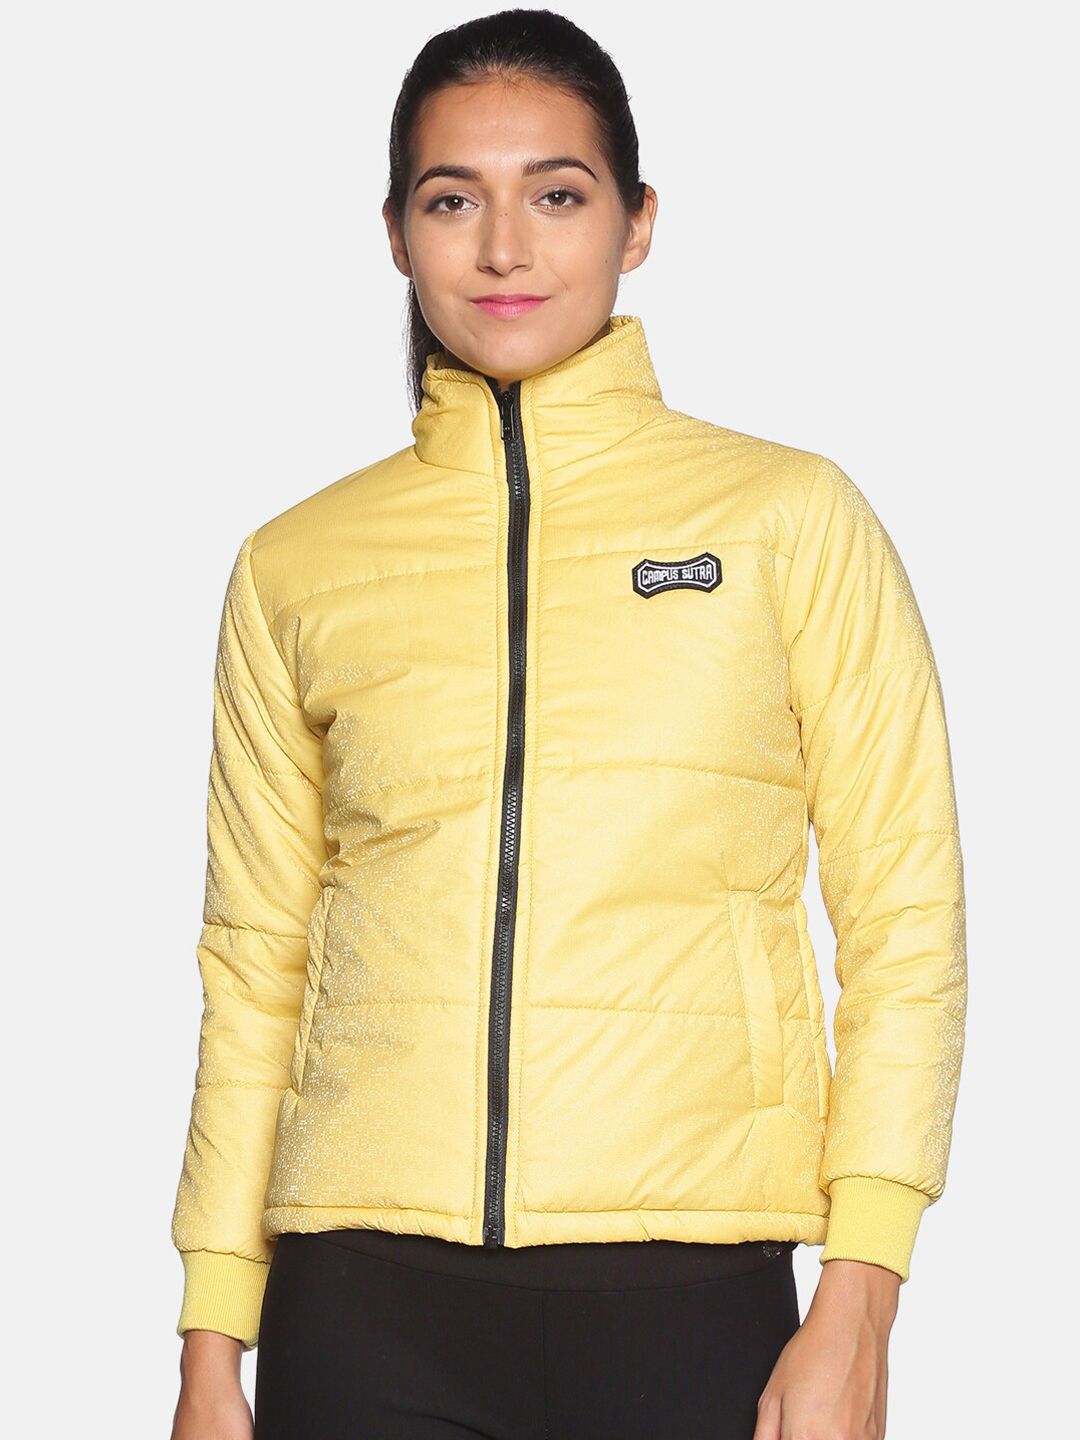 Campus Sutra Women Yellow Windcheater Outdoor Puffer Jacket Price in India